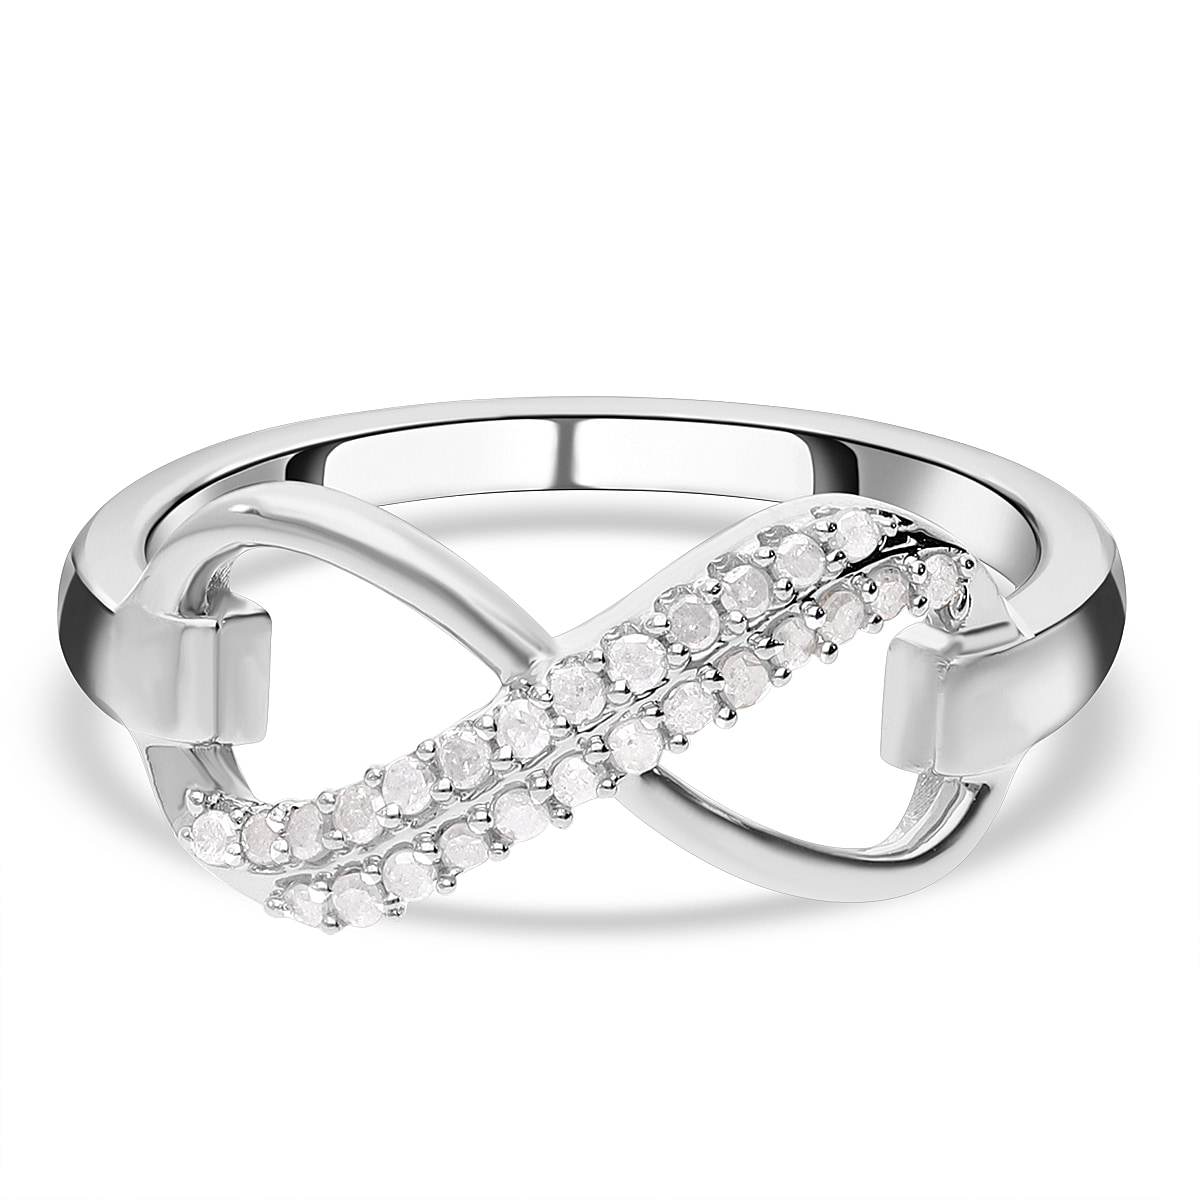 Diamond Infinity Ring in Platinum Overlay Sterling Silver 0.15 Ct.